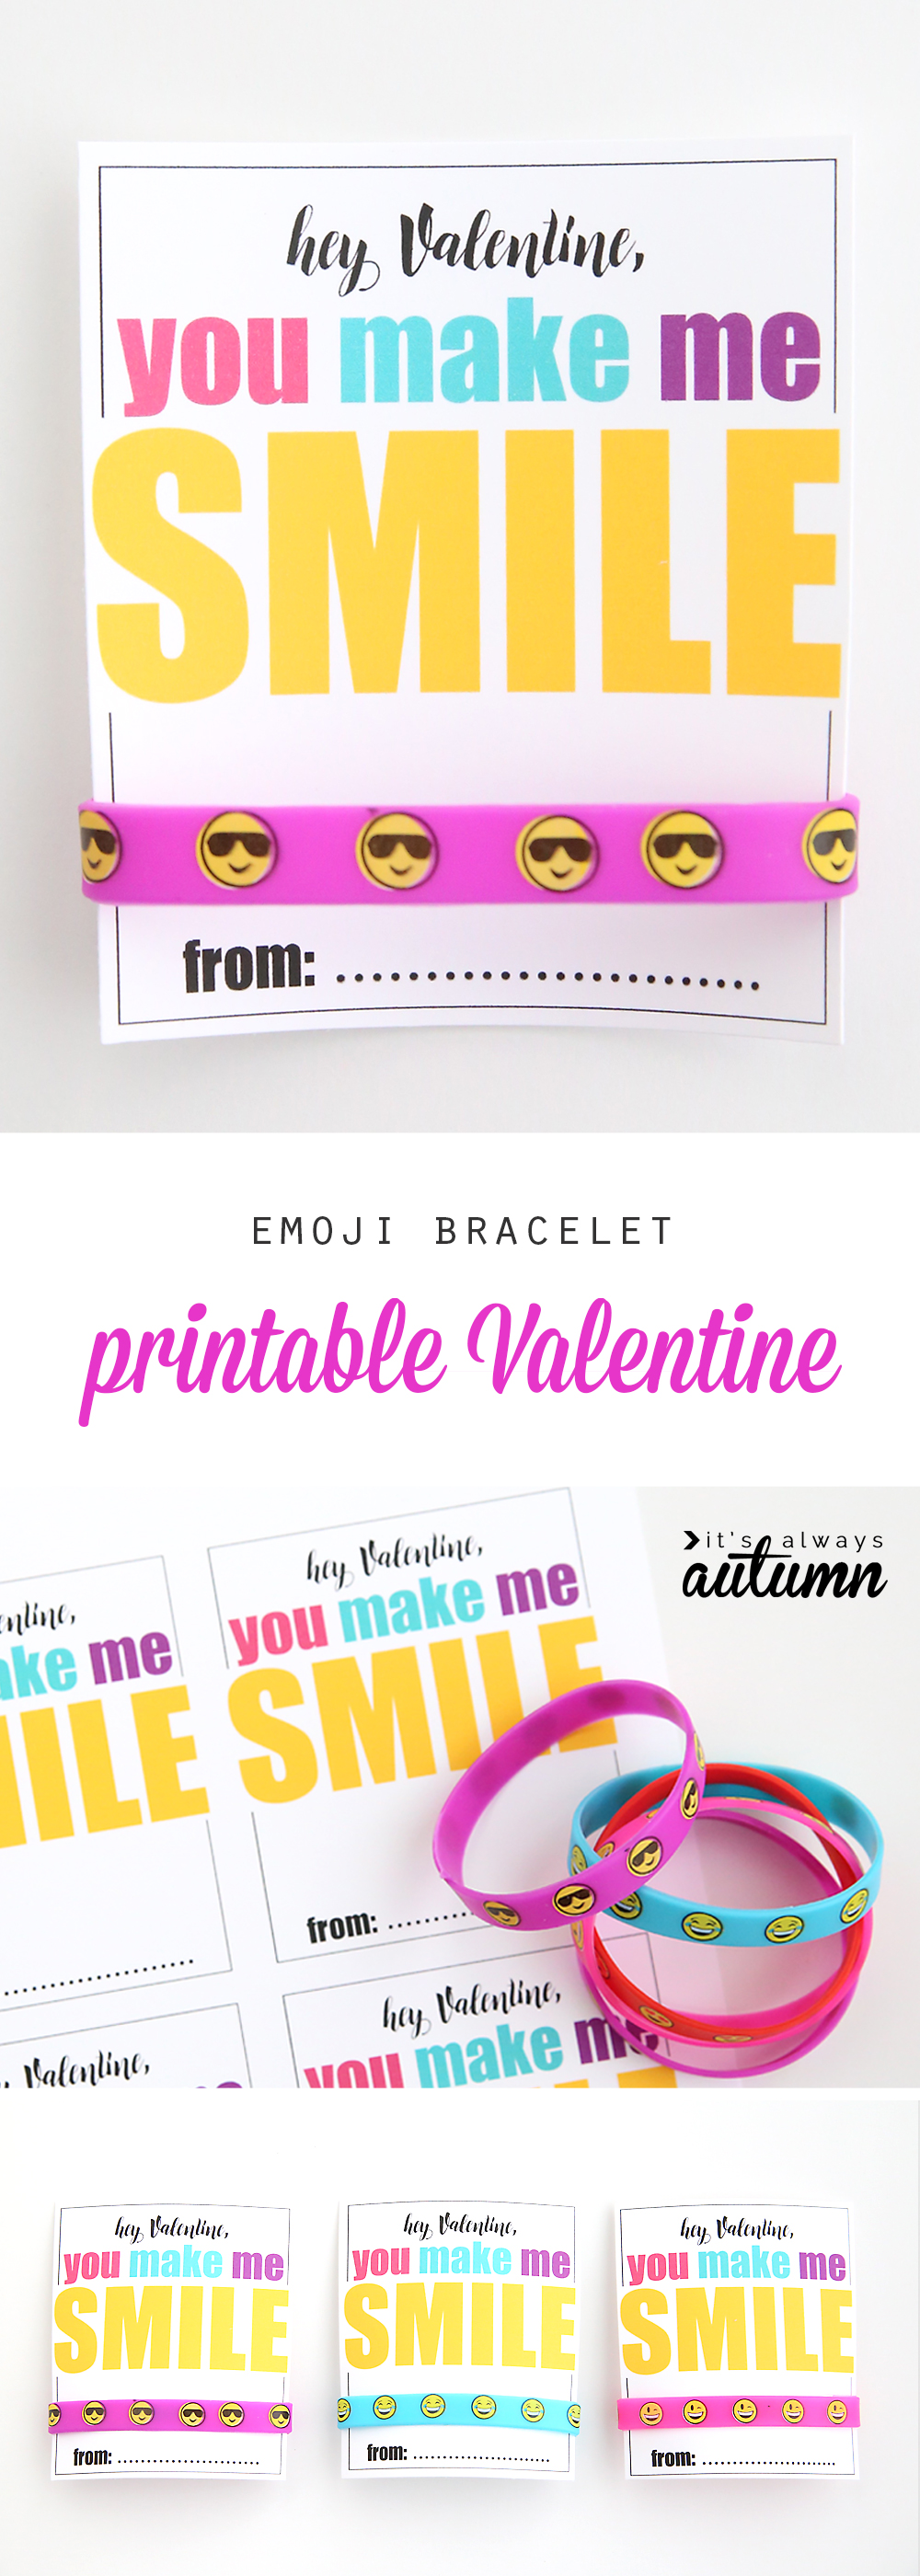 Valentine\'s card that says Hey Valentine, you make me smile, with a bracelet that has emojis on it